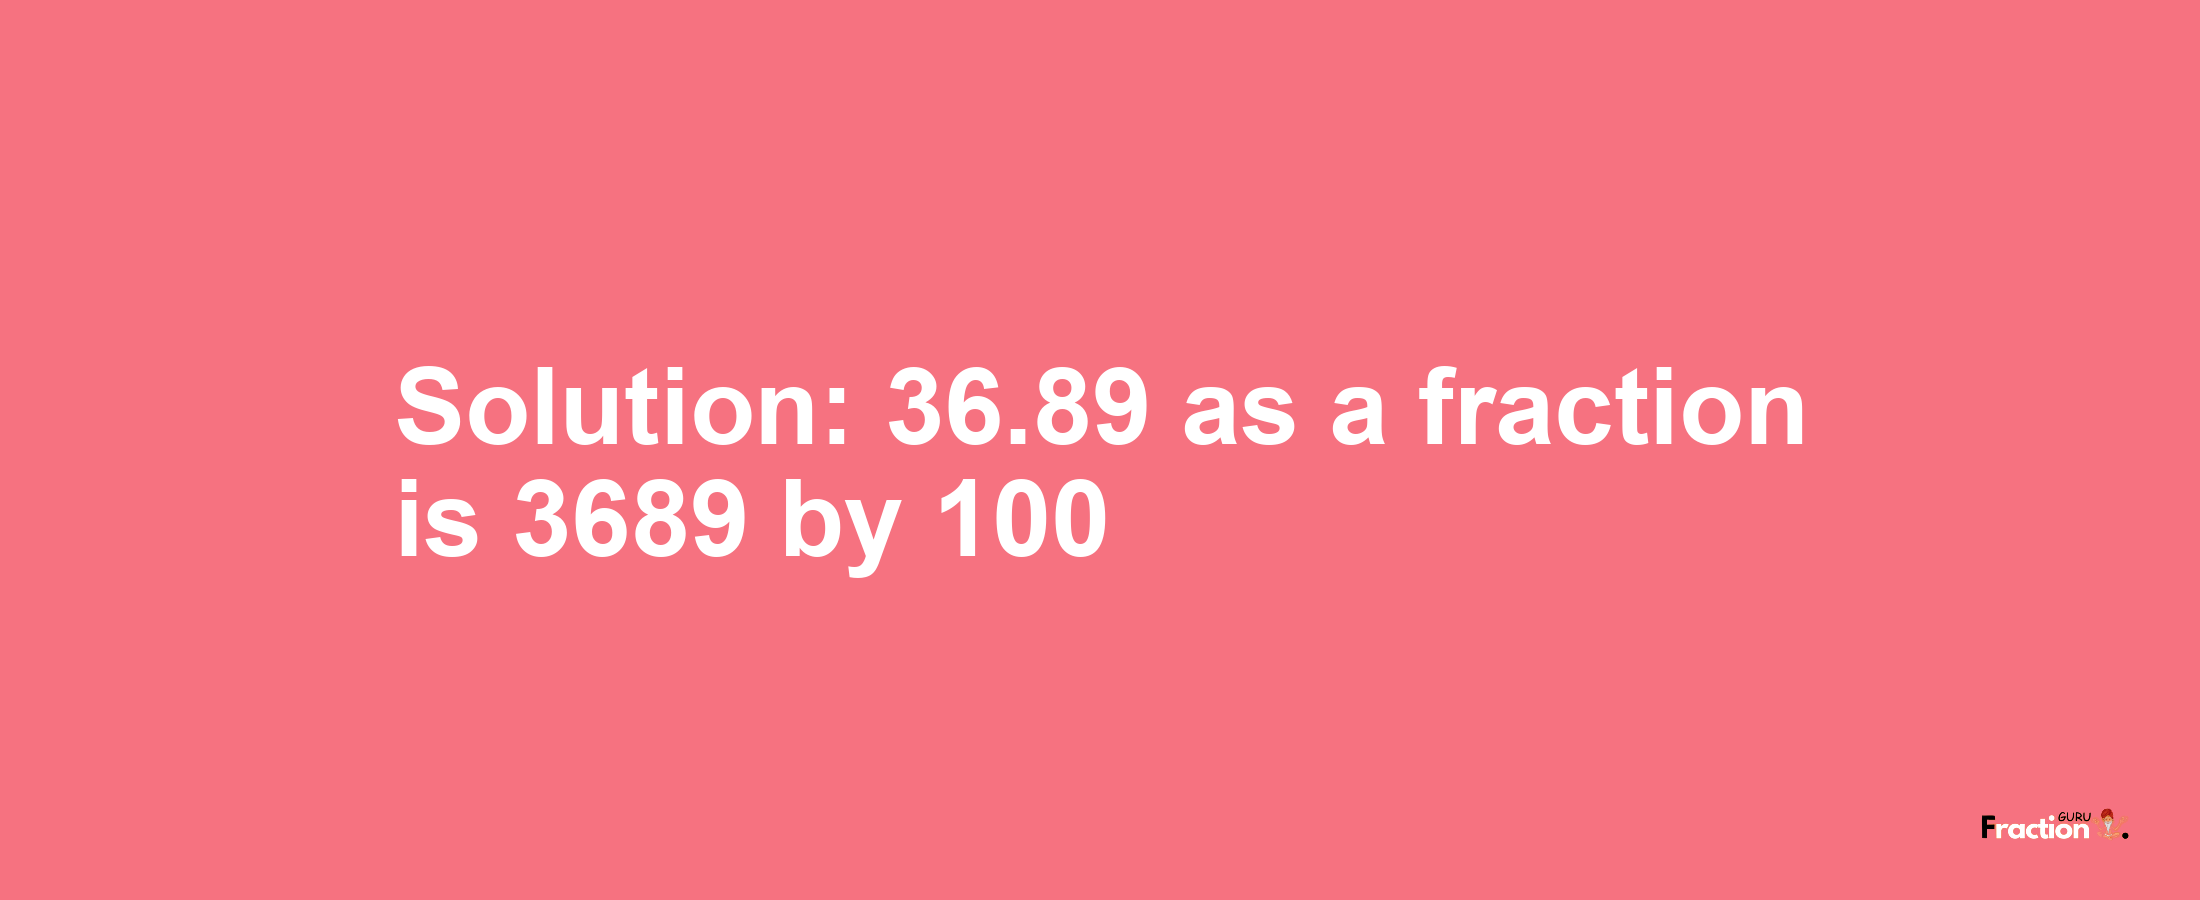 Solution:36.89 as a fraction is 3689/100